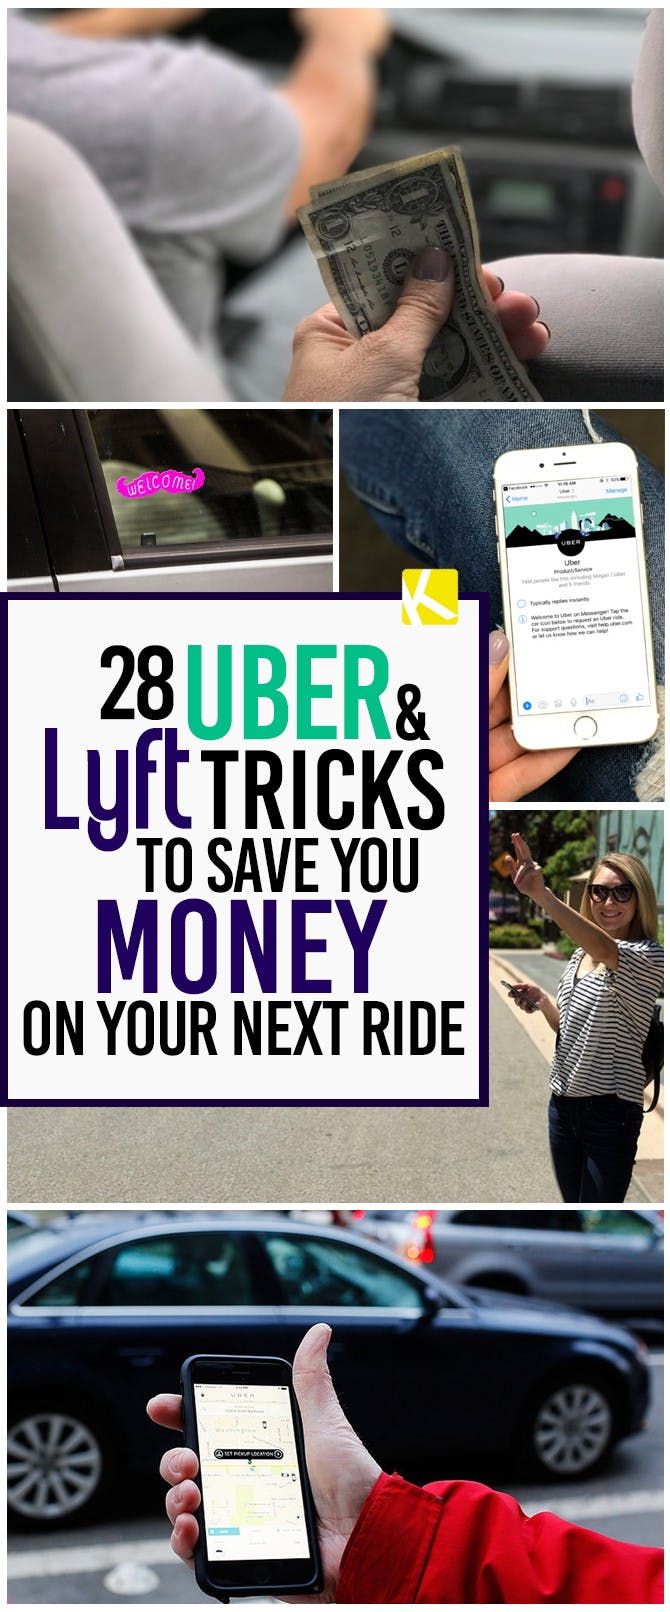 26 Uber and Lyft Tricks to Save You Money on Your Next Ride